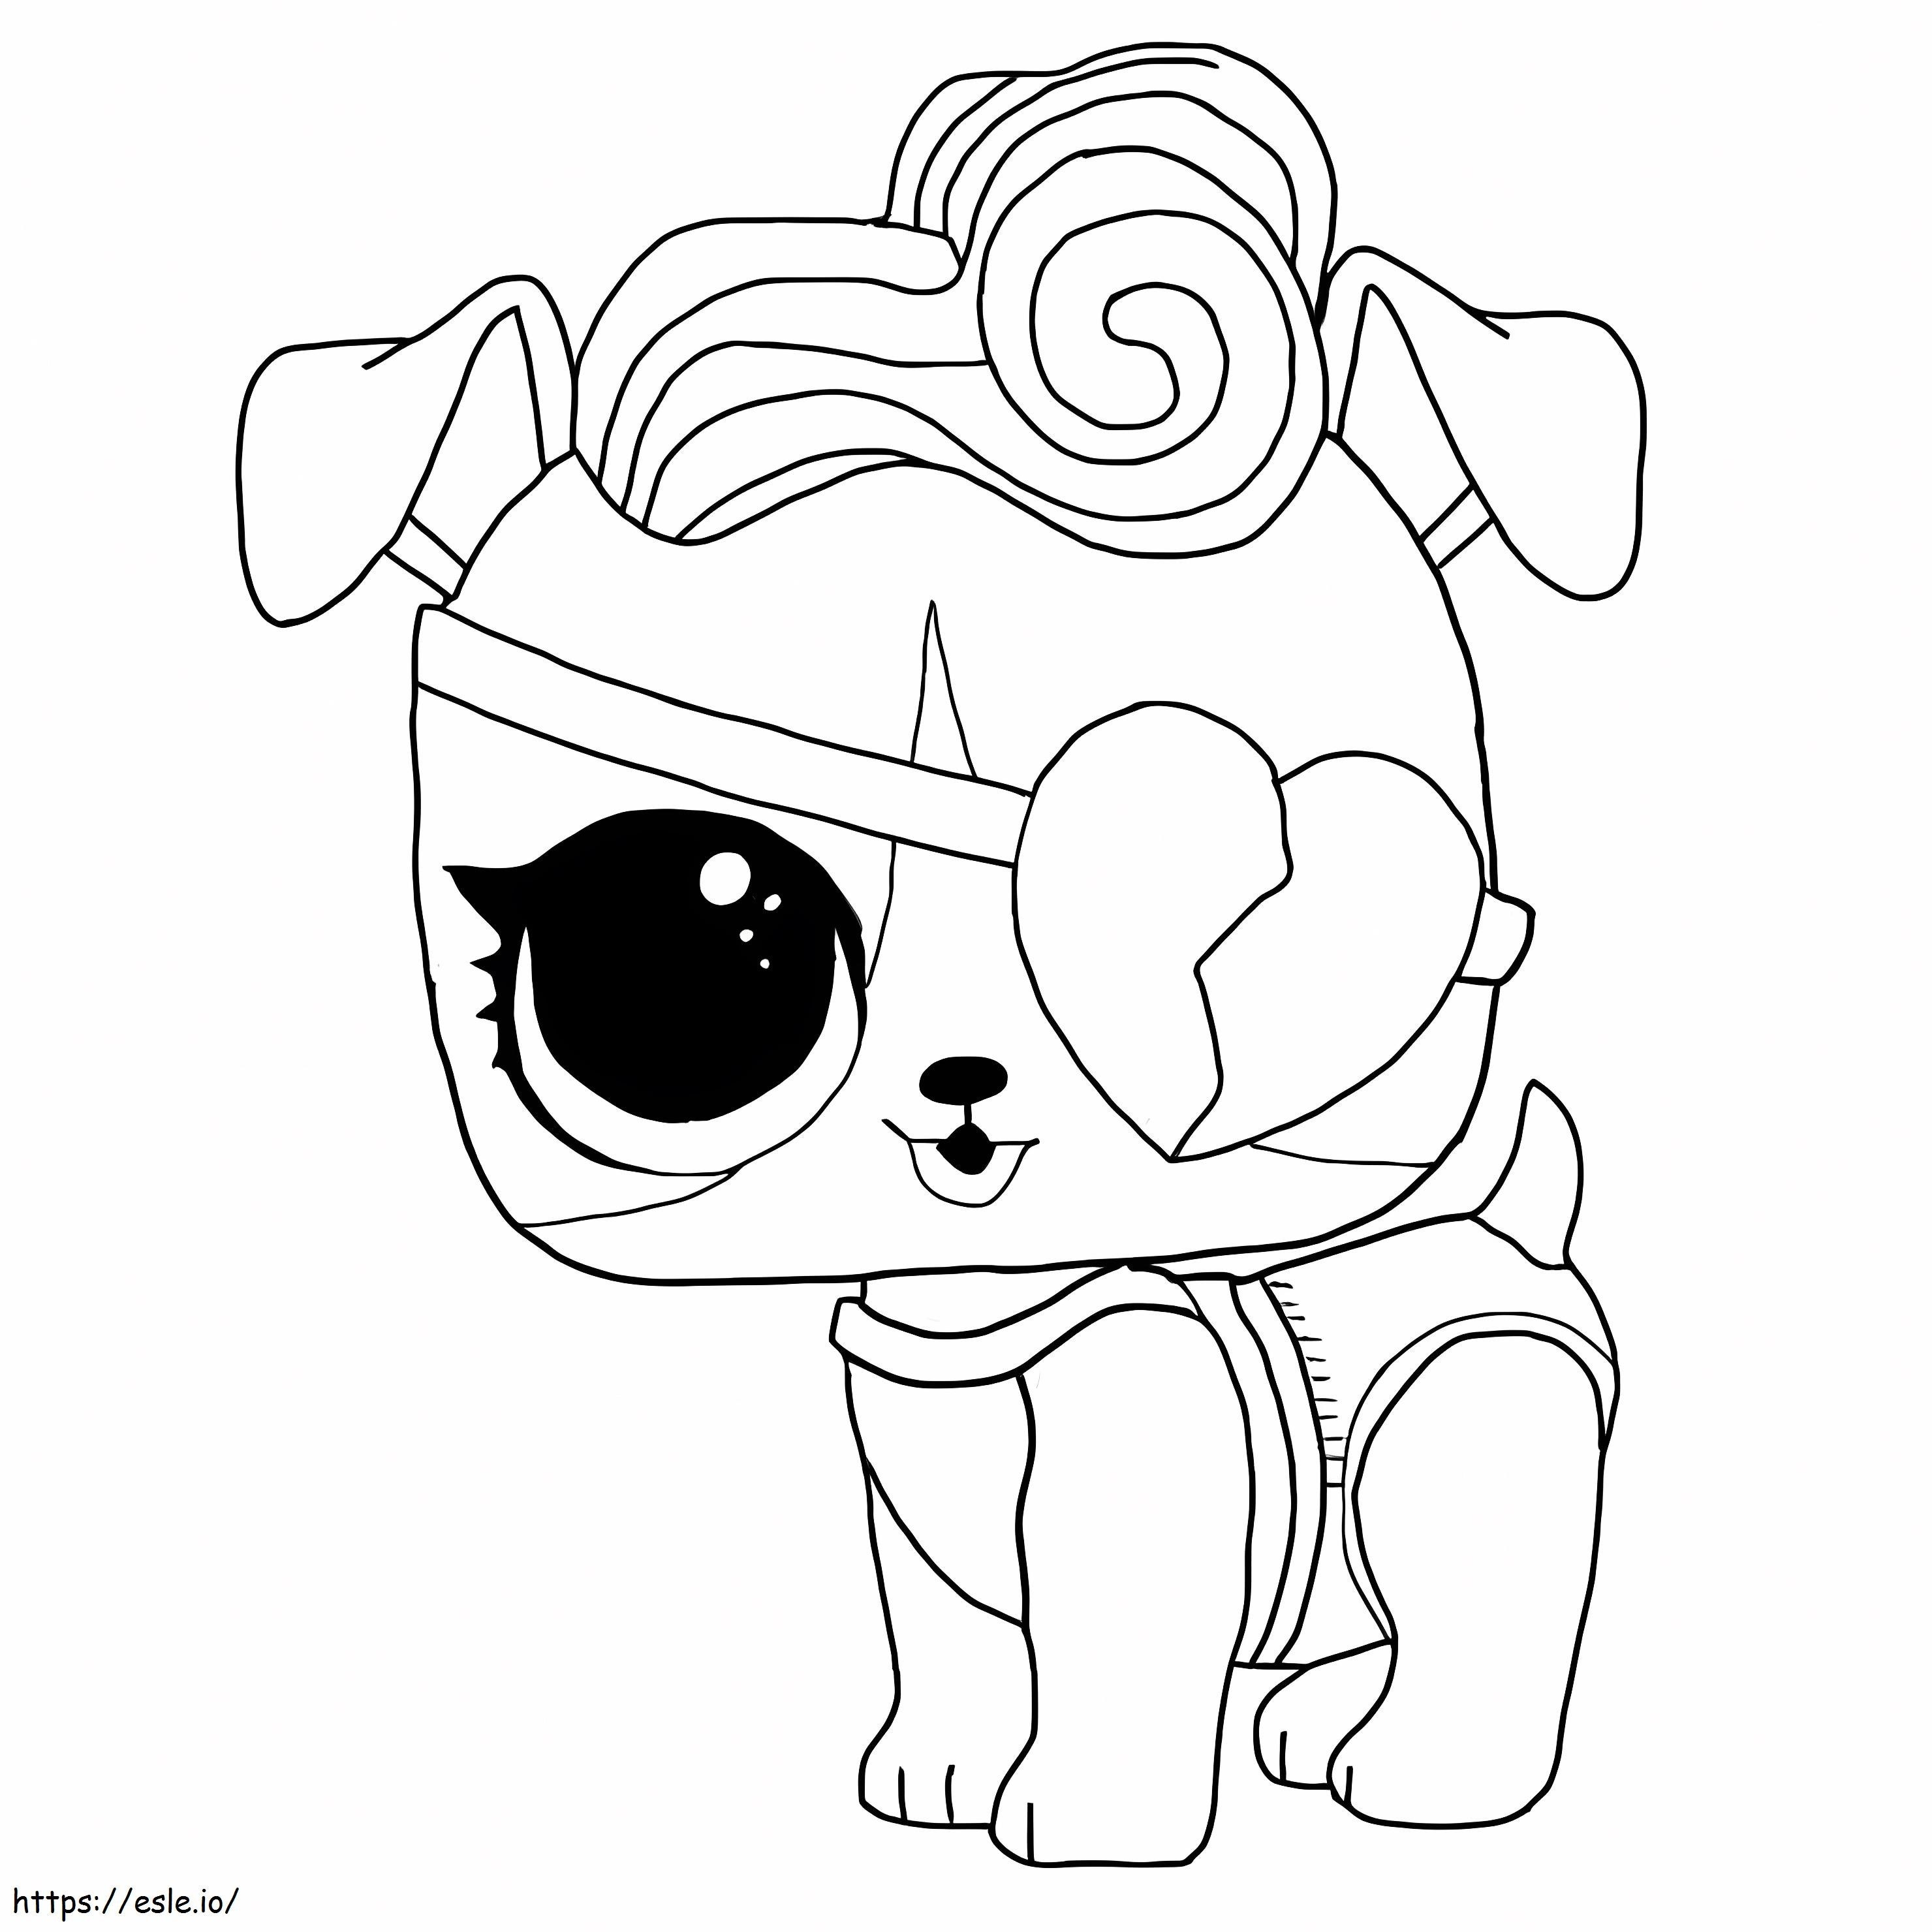 Doggie Stardust Lol Pets coloring page